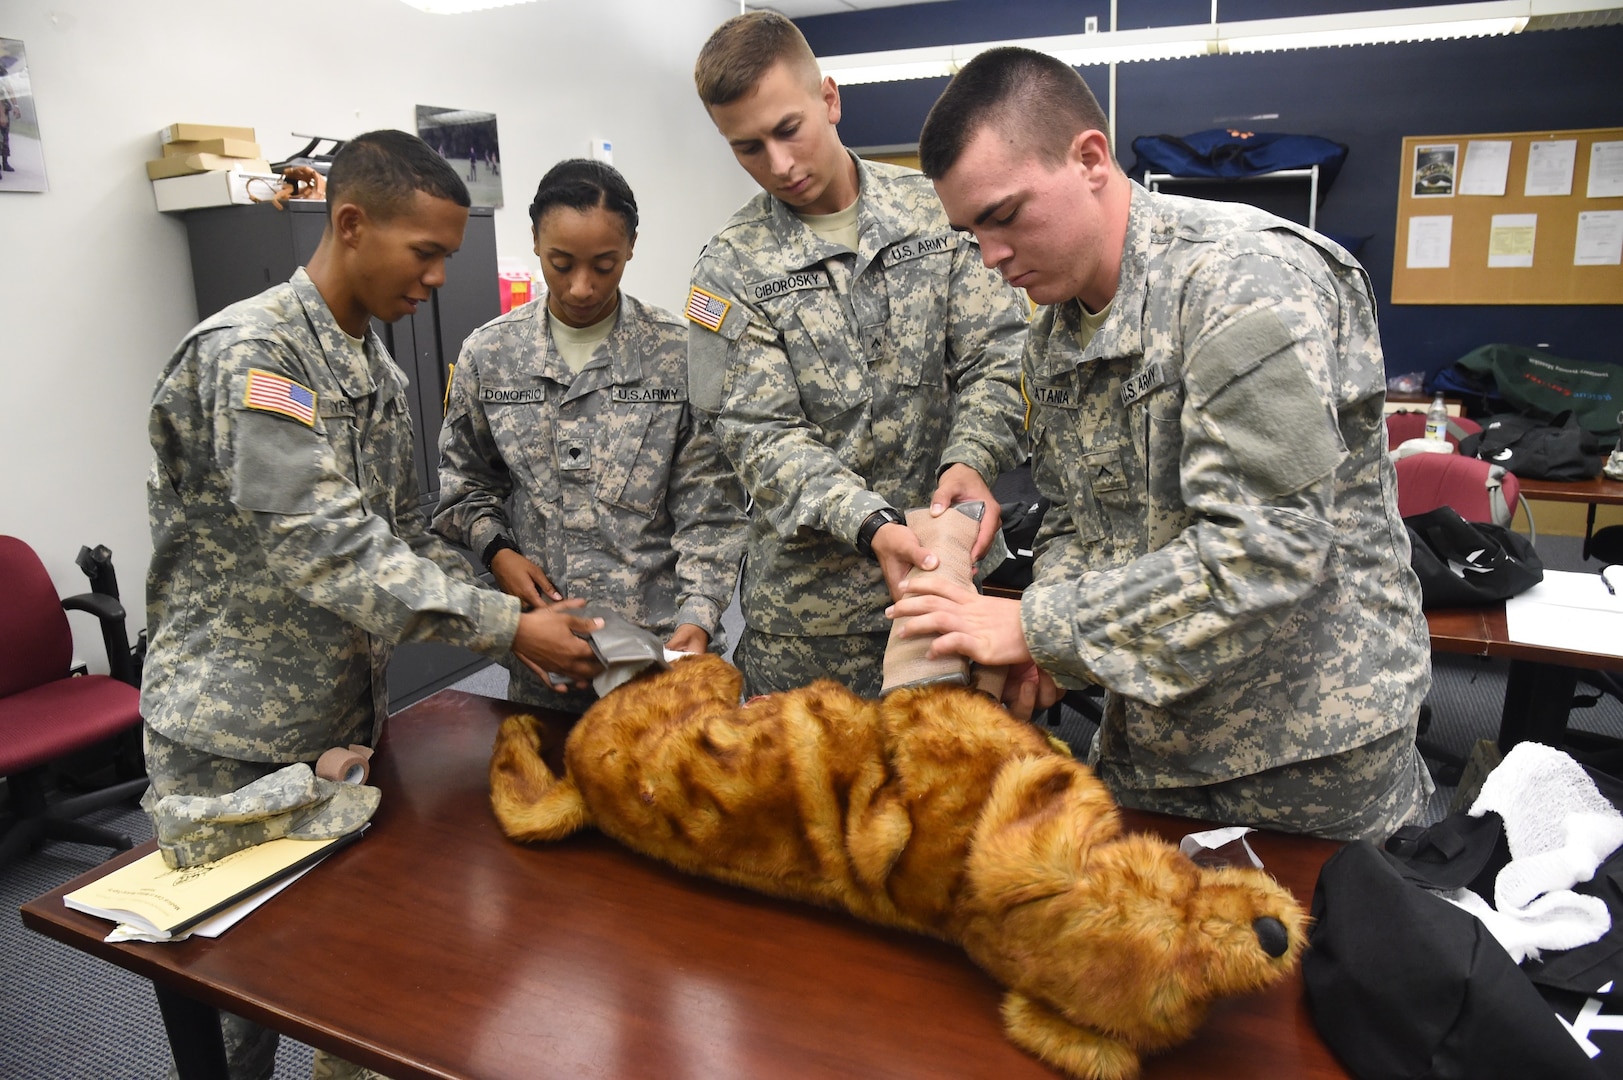 Students from the Military Working Dog Handlers Course at Joint Base San Antonio-Lackland, Texas, treat simulated military working dog injuries Sept. 10, 2015. The innovative design of the MWD simulator is helping the 341st Training Squadron provide a realistic training course for MWD handlers and better prepare them to save the life of their canines if needed. (U.S. Air Force photo by Photo by Staff Sgt. Chelsea Brownin/Released)